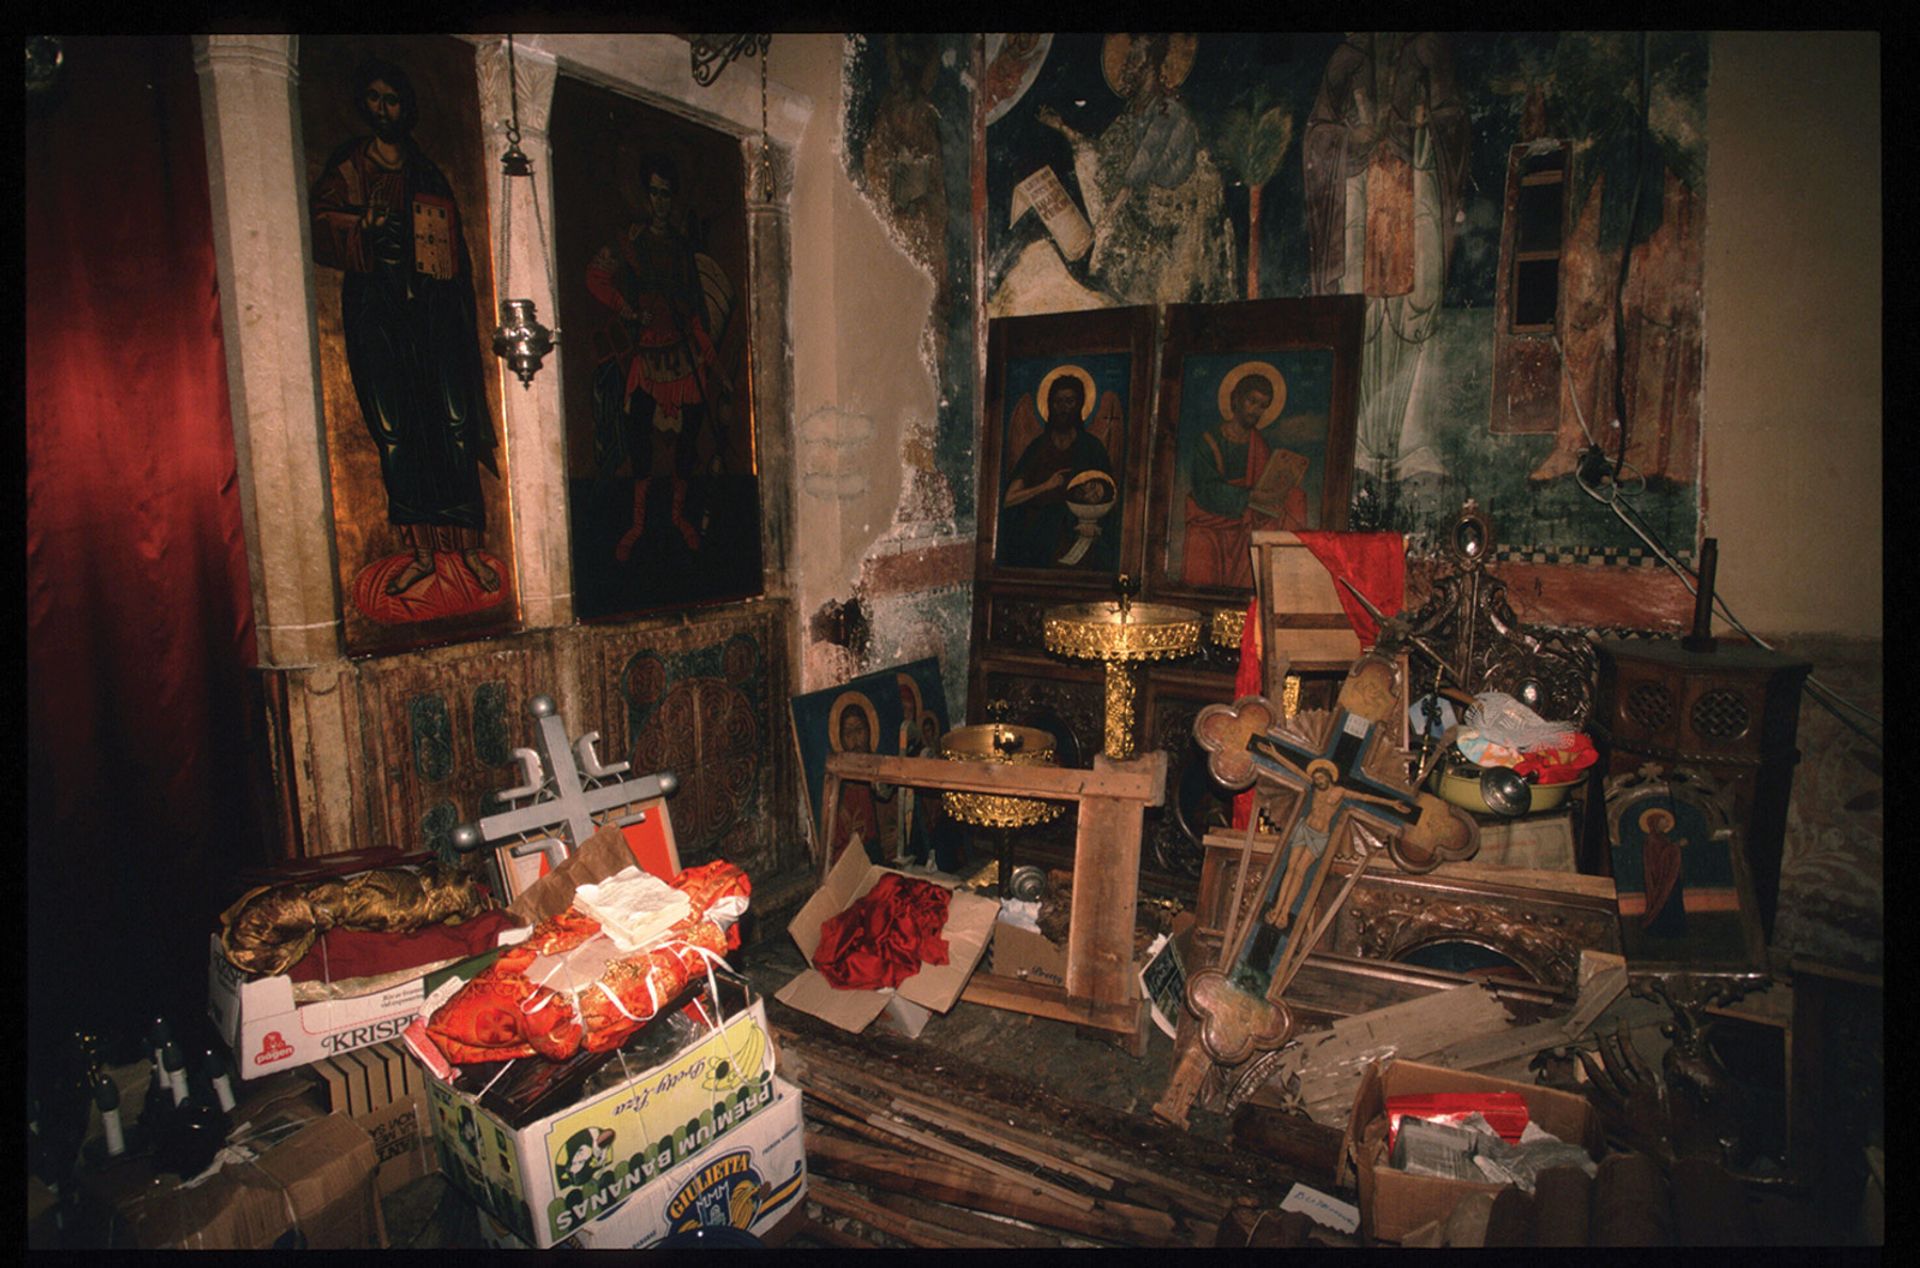 A store of looted artefacts from bombed churches in Pec, Kosovo, towards the end of the Yugoslav wars of the 1990s. Photo: Scott Peterson/Liaison